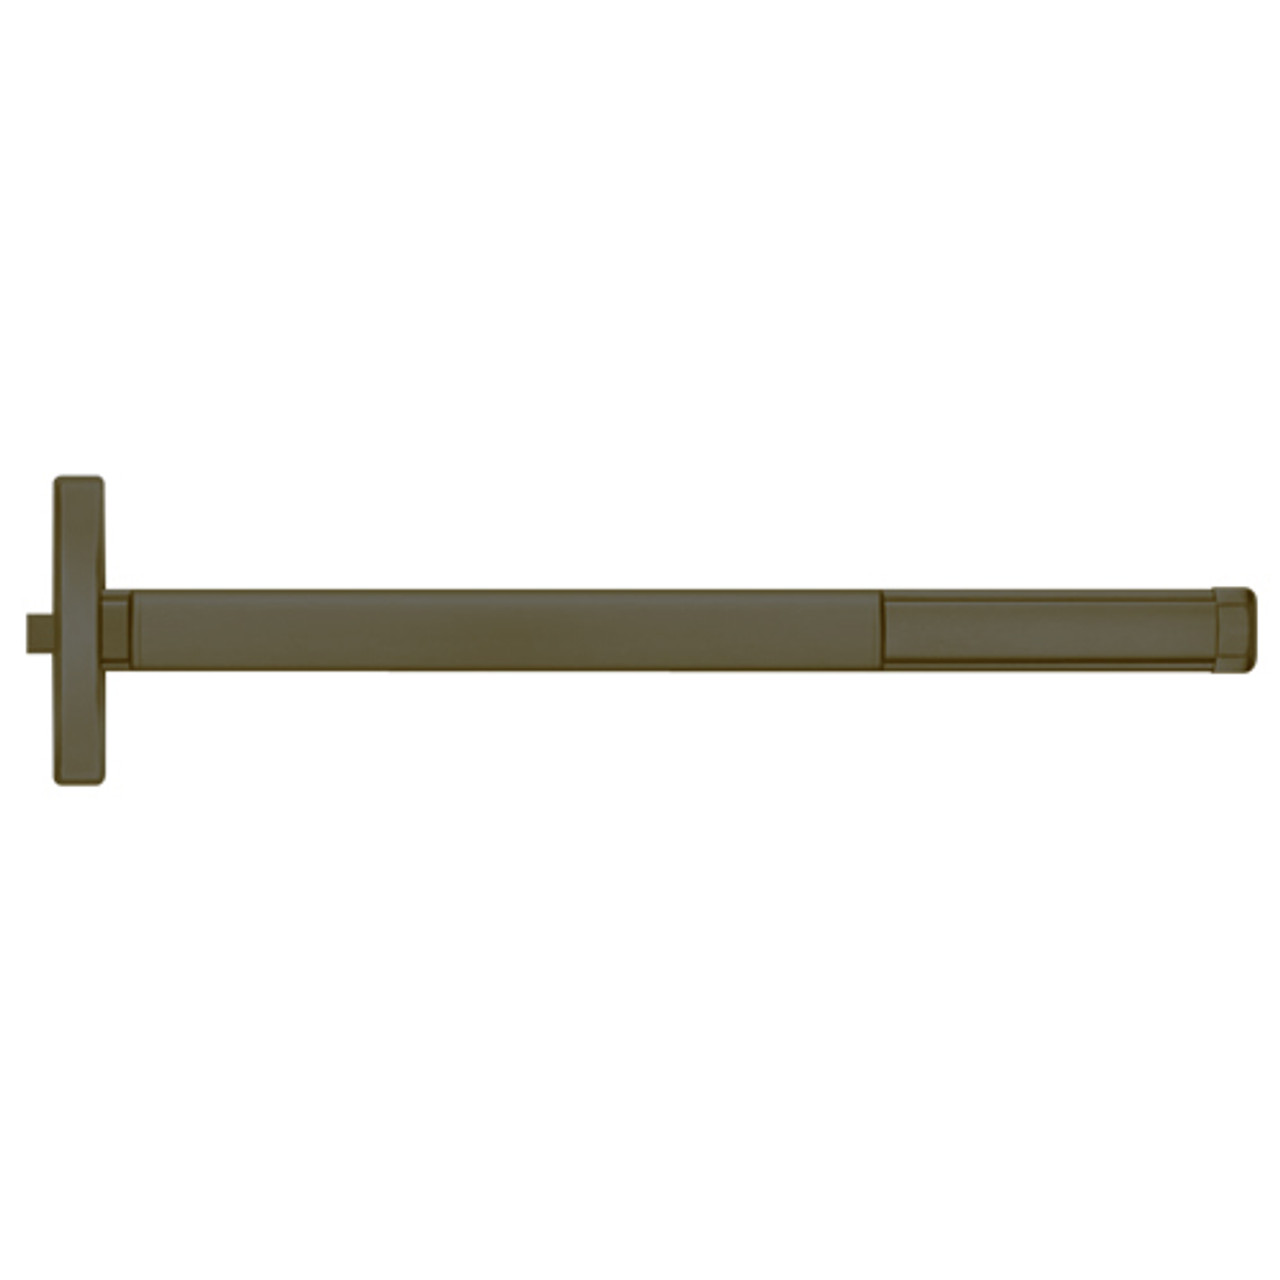 DE2414-613-48 PHI 2400 Series Non Fire Rated Apex Rim Exit Device with Delayed Egress Prepped for Lever Always Active in Oil Rubbed Bronze Finish